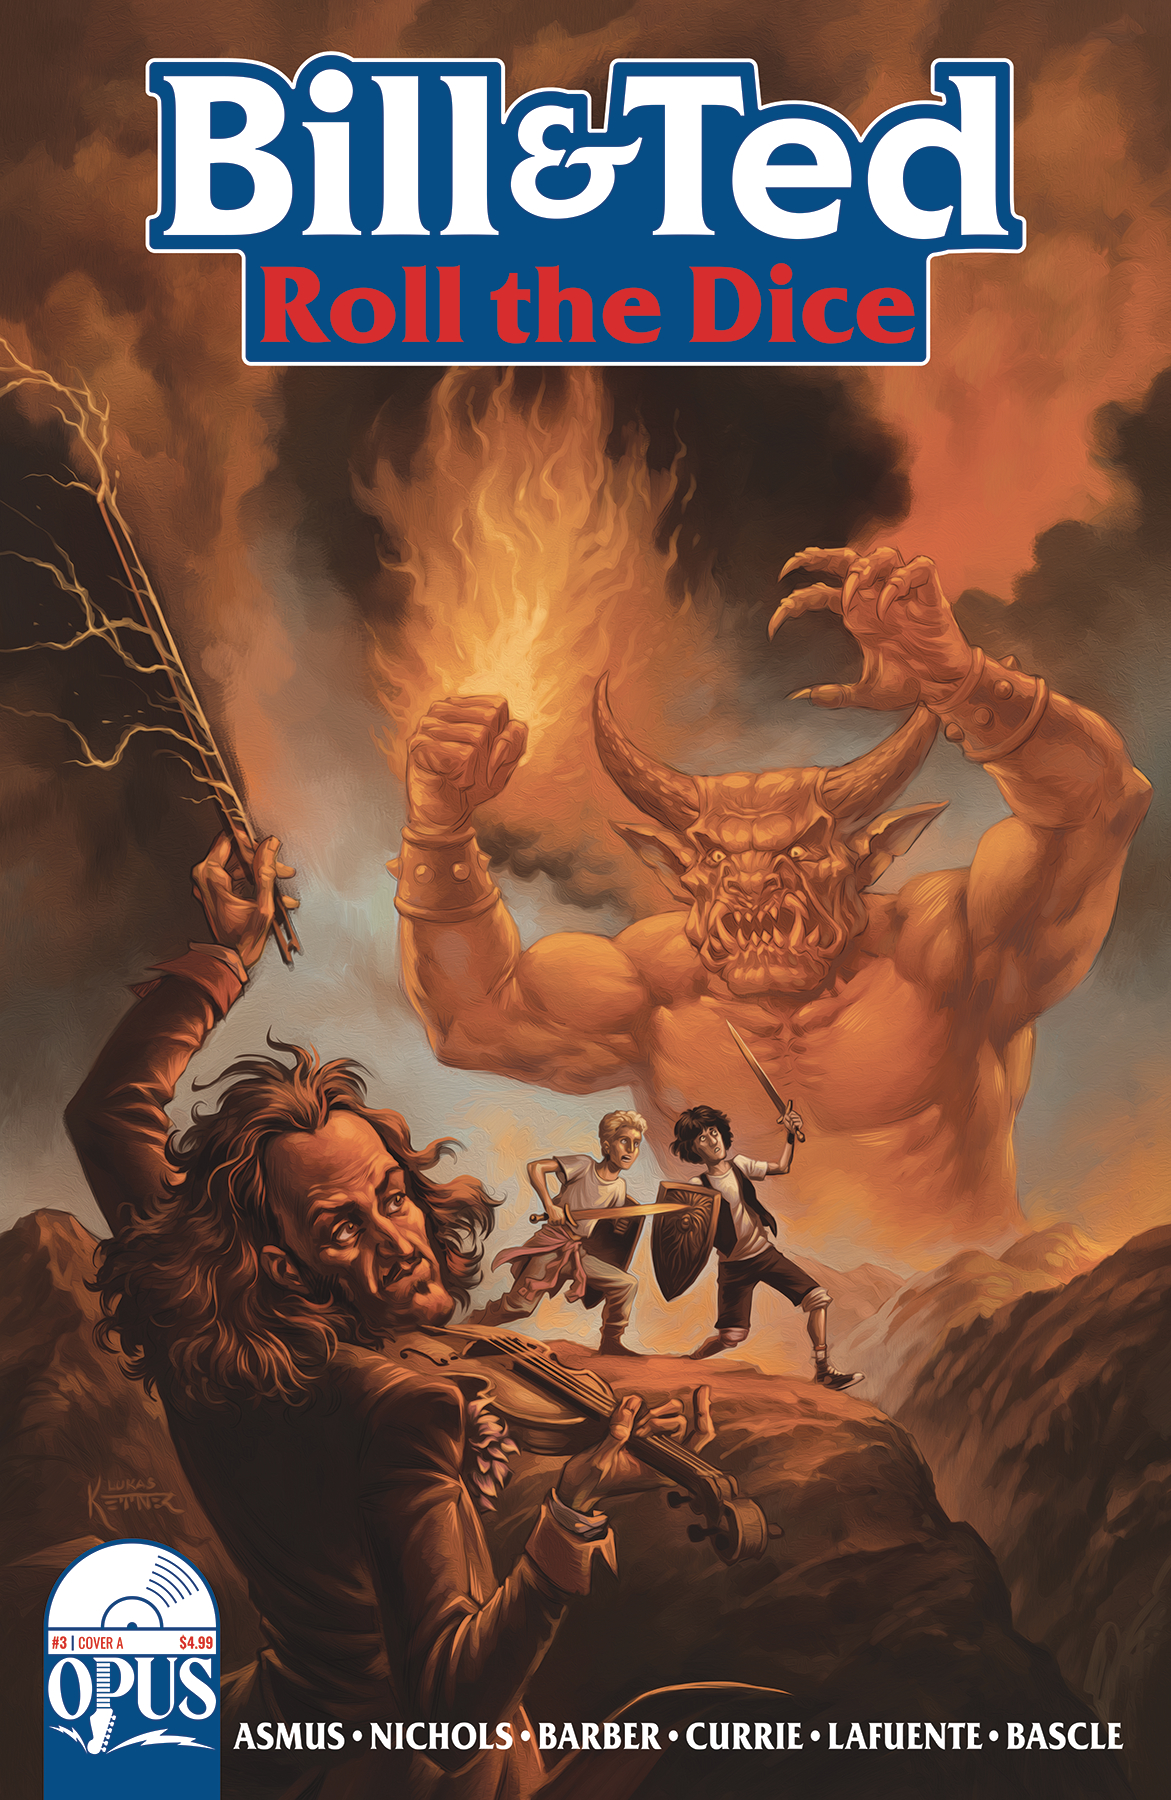 Bill & Ted Roll Dice #3 Cover A Ketner